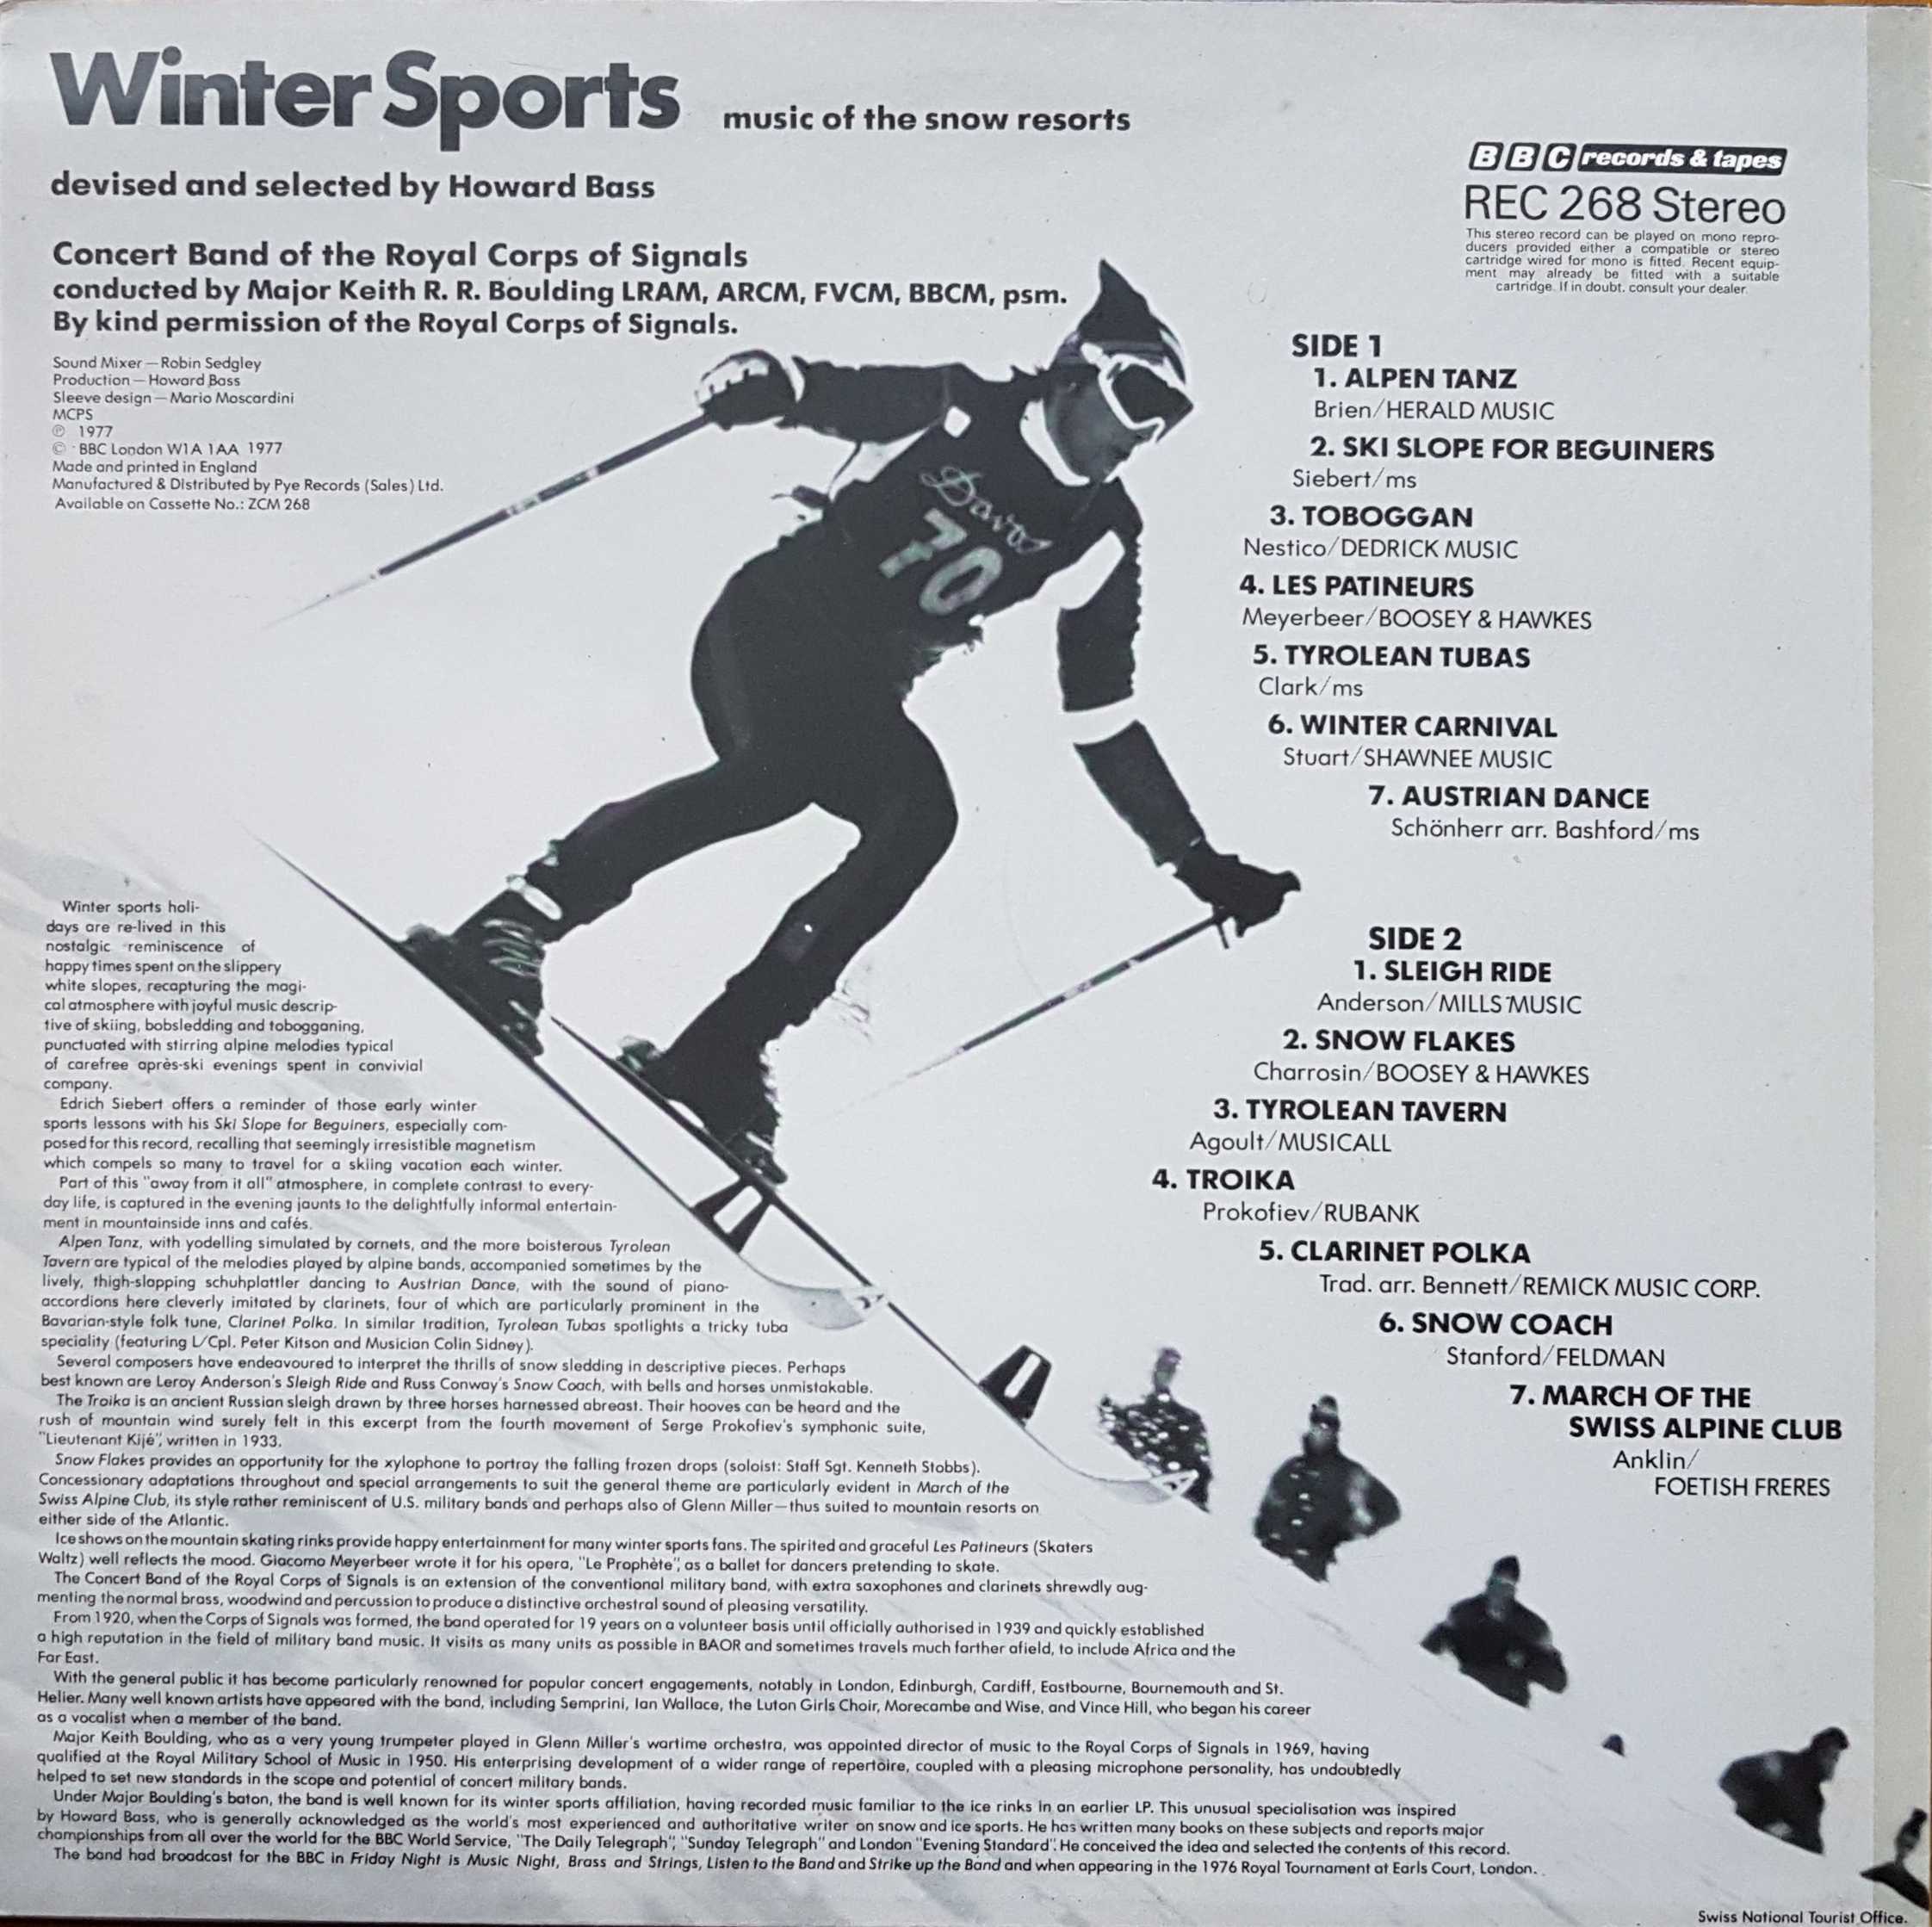 Picture of REC 268 Winter sports - Music of the snow resorts by artist Various from the BBC records and Tapes library